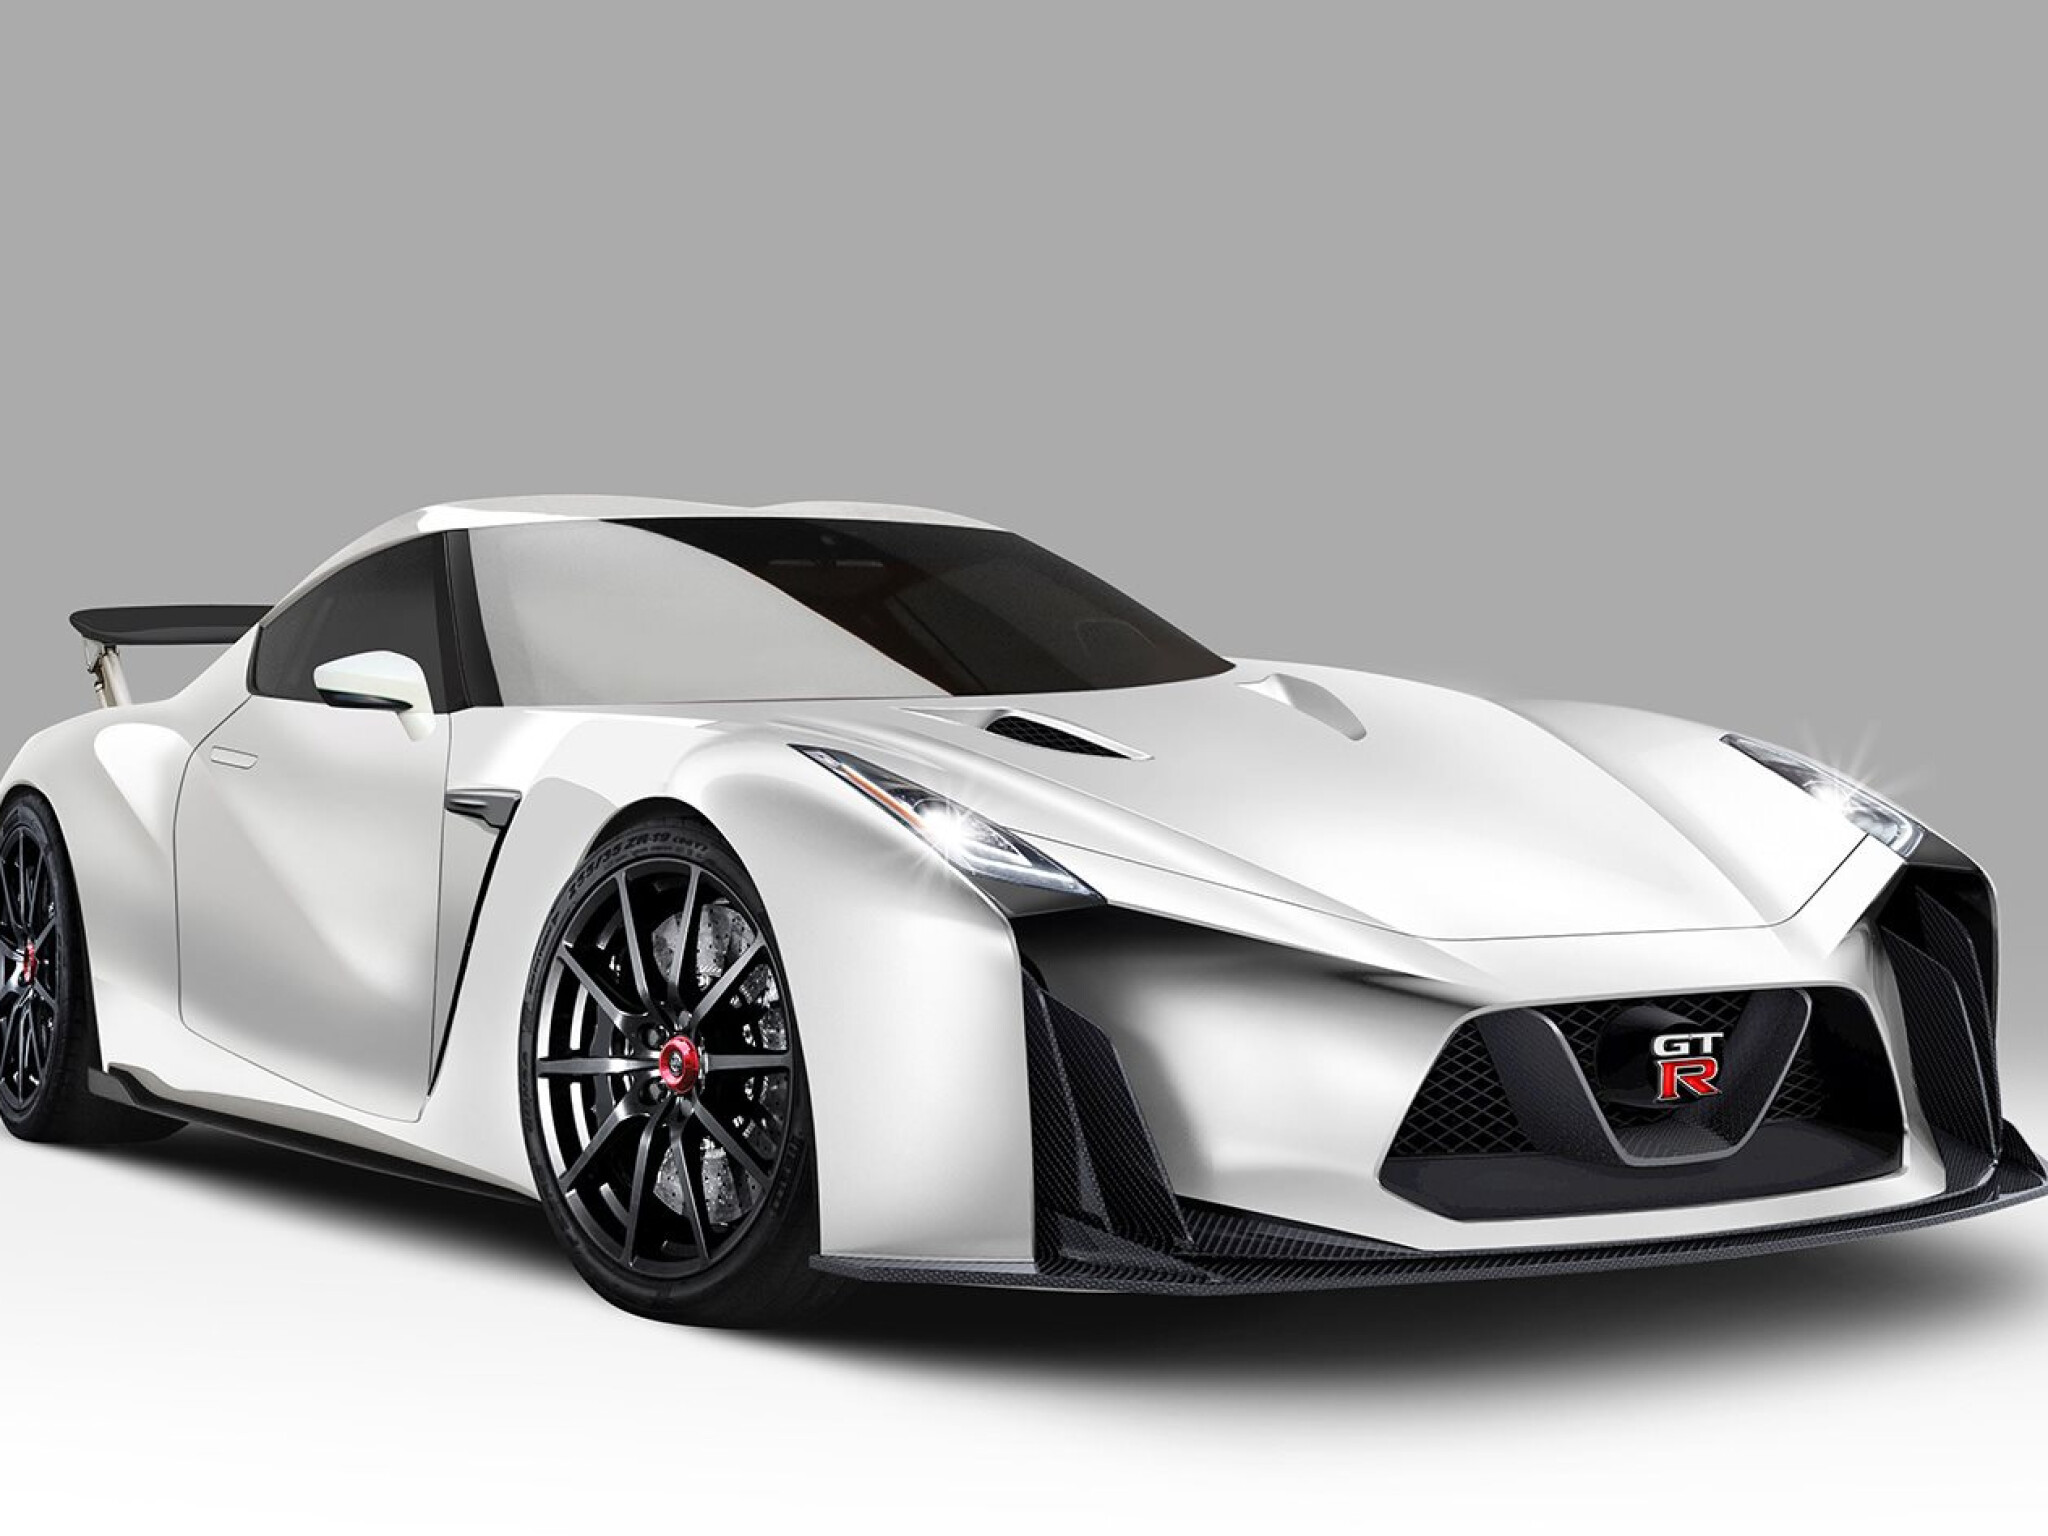 Is this the R36 Nissan GT-R? - NZ Autocar